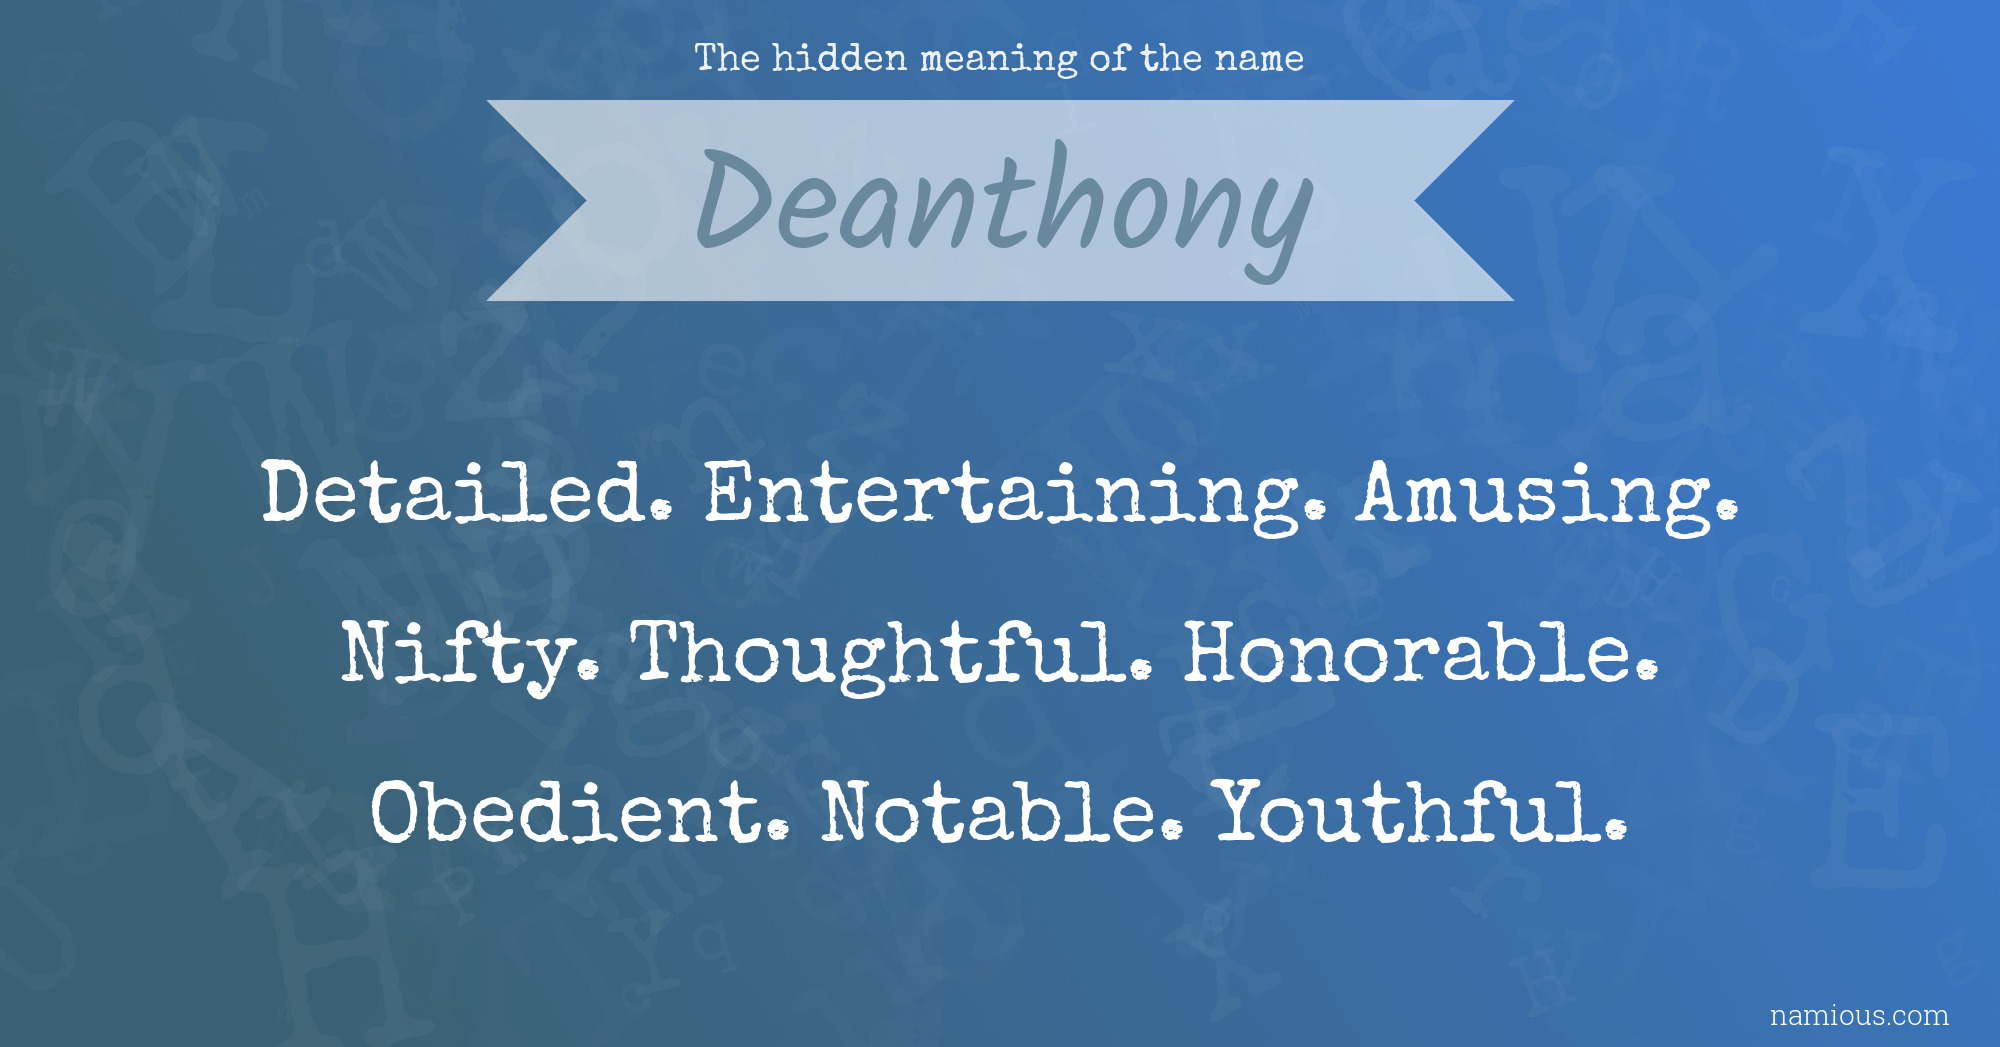 The hidden meaning of the name Deanthony